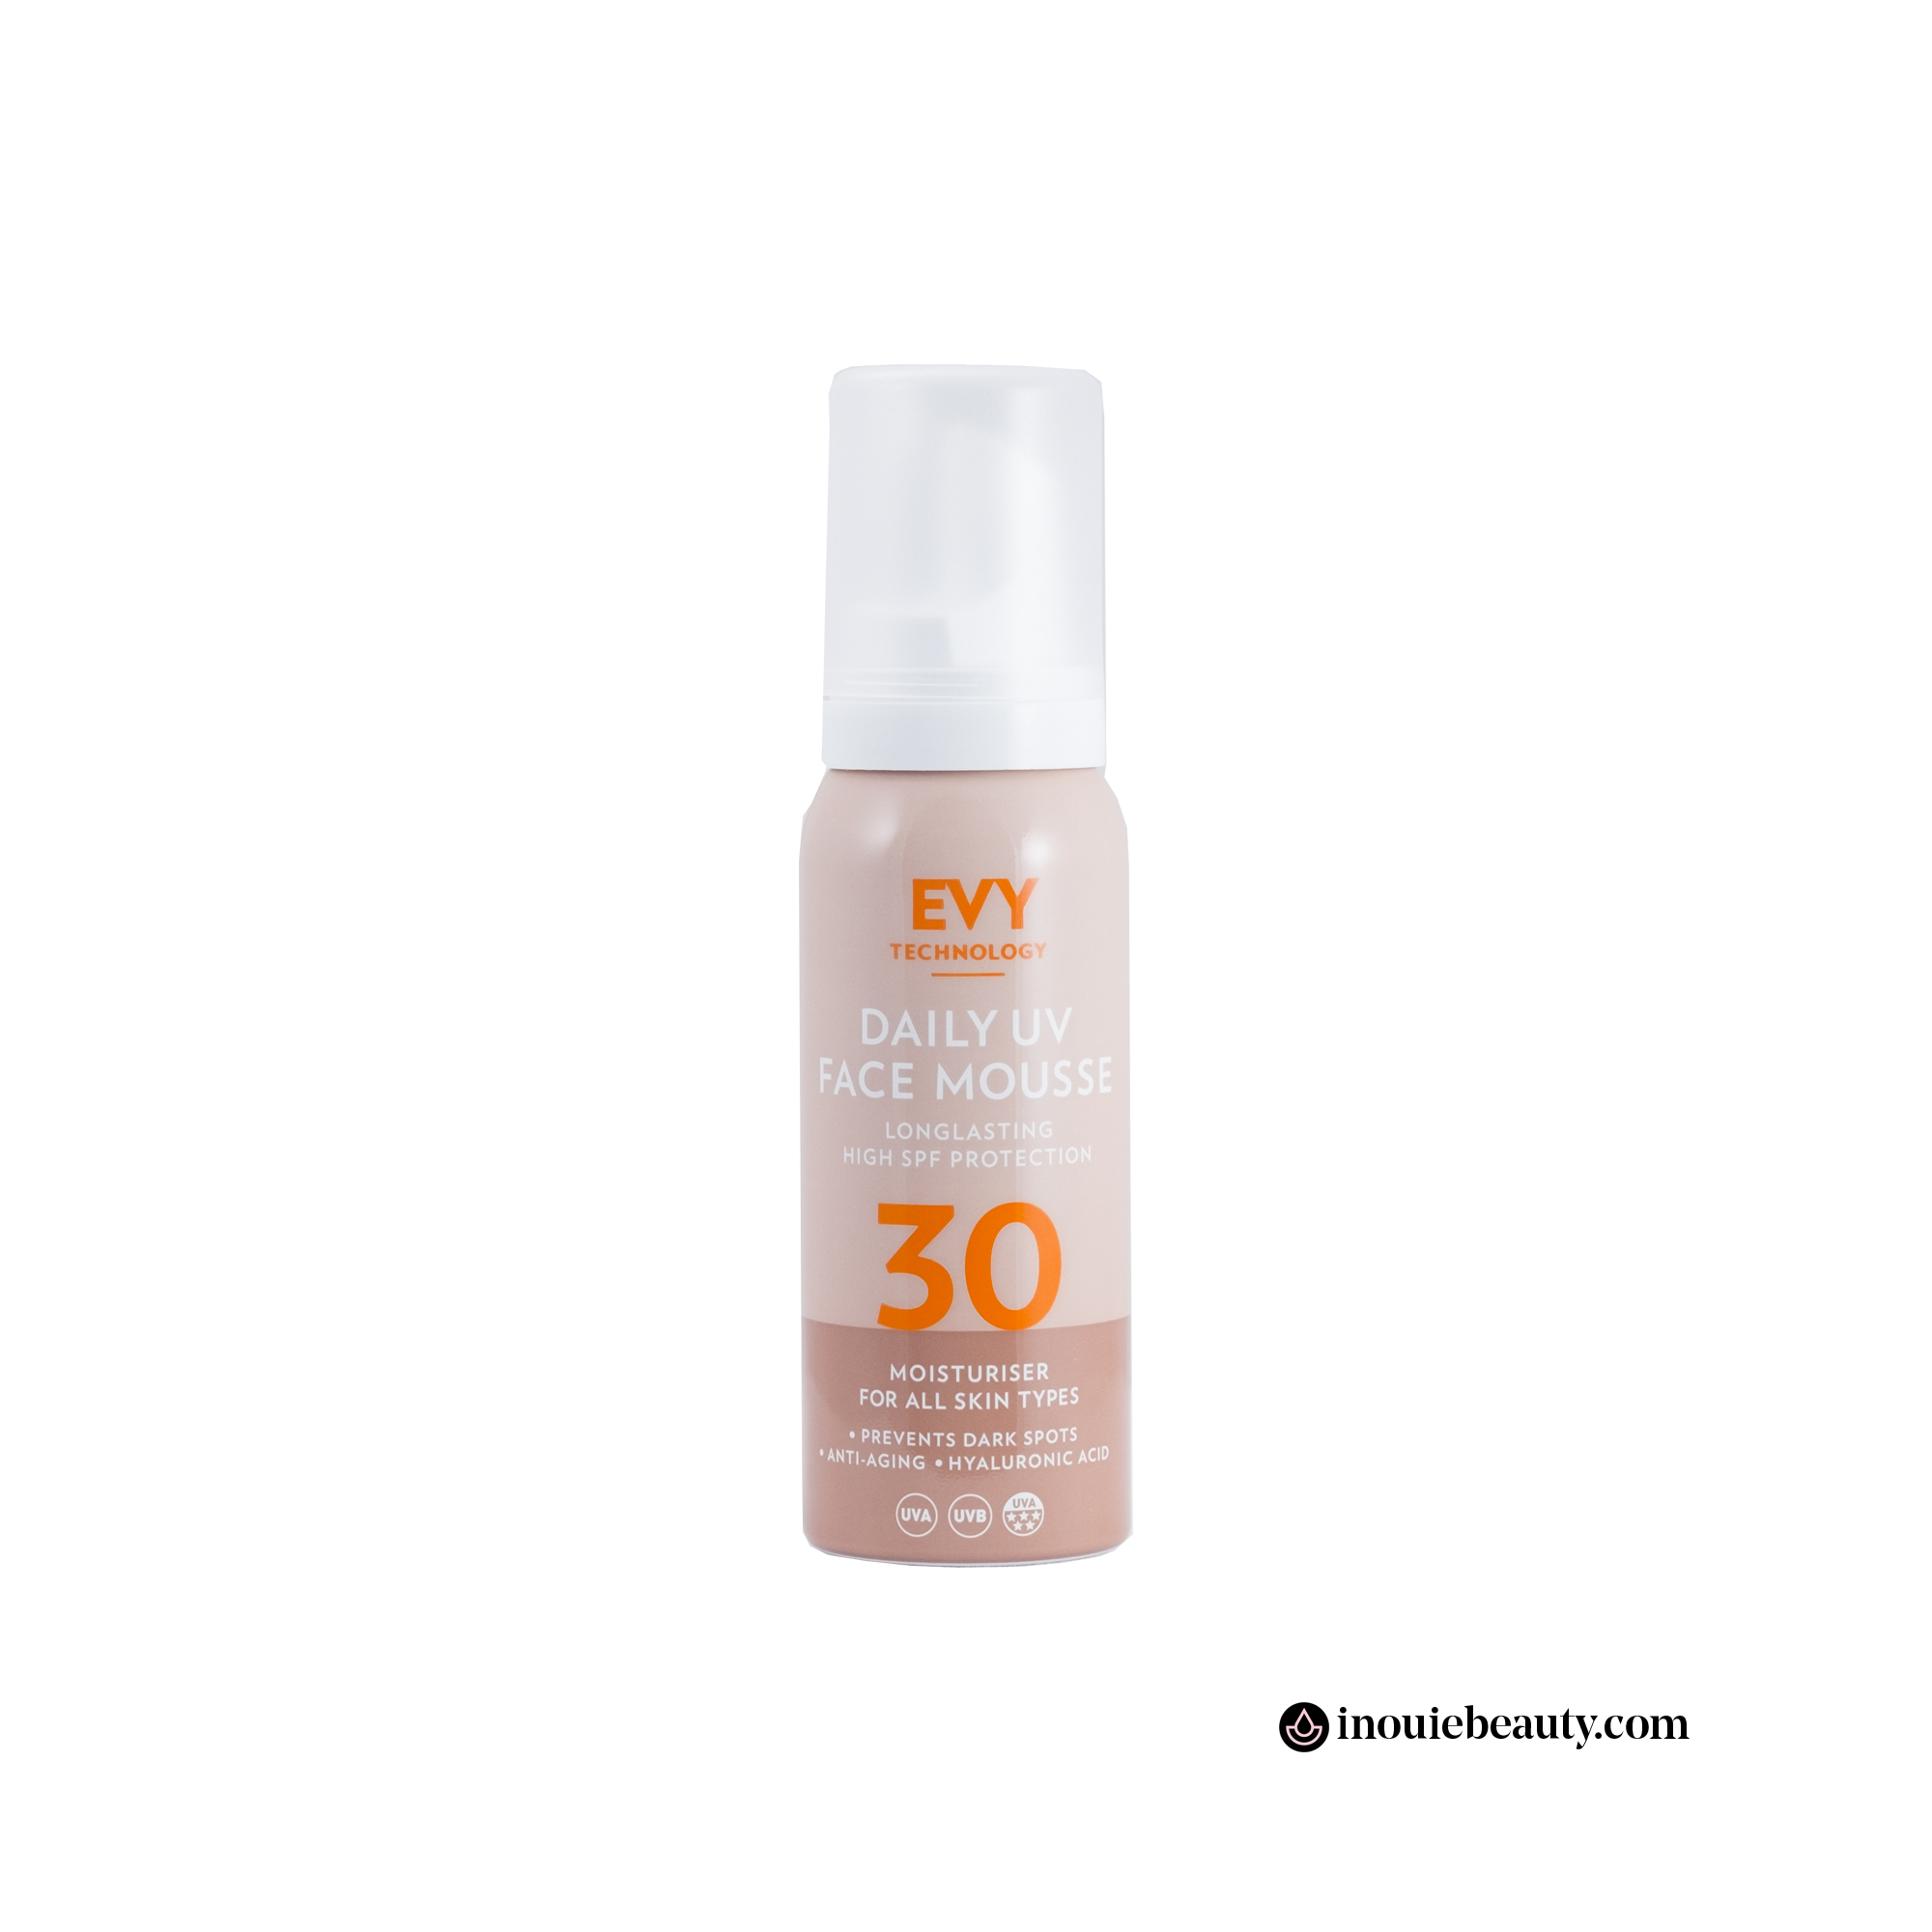 EVY Daily Defense Face Mousse SPF 30